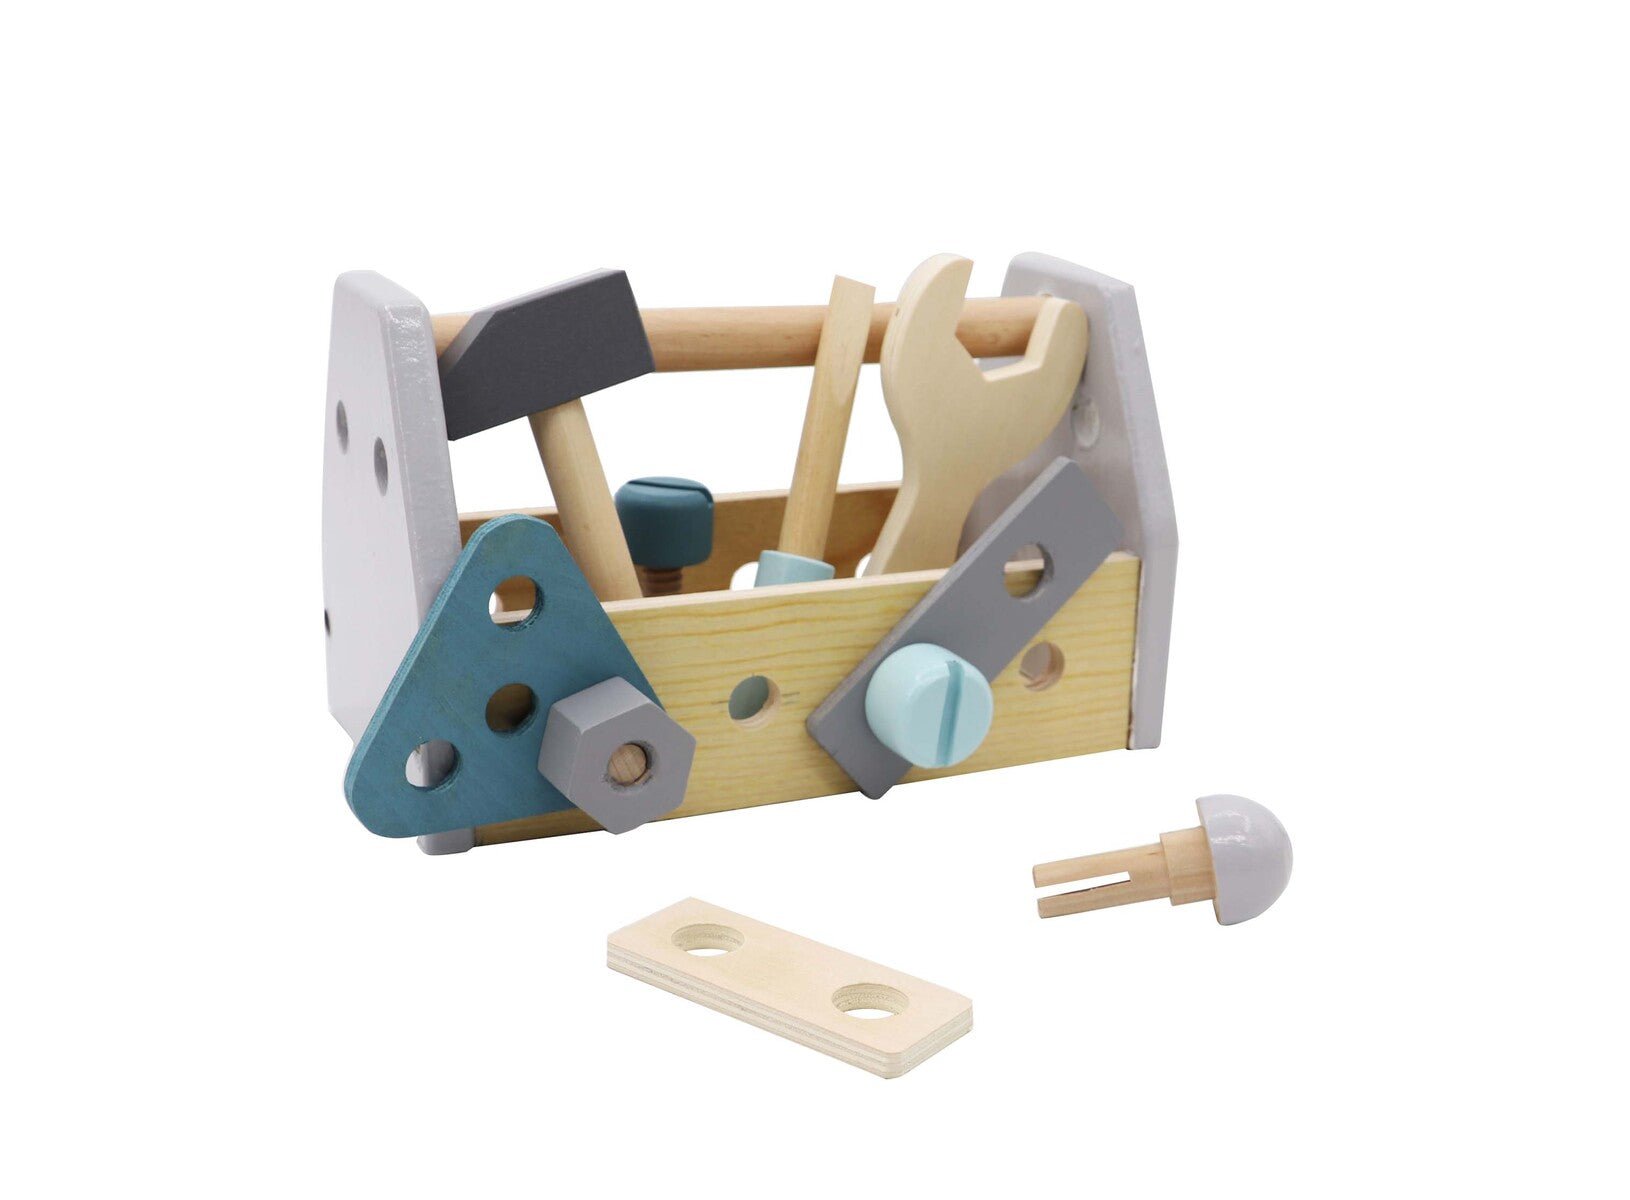 Buy Now: Wooden Toolbox for Creative Kids